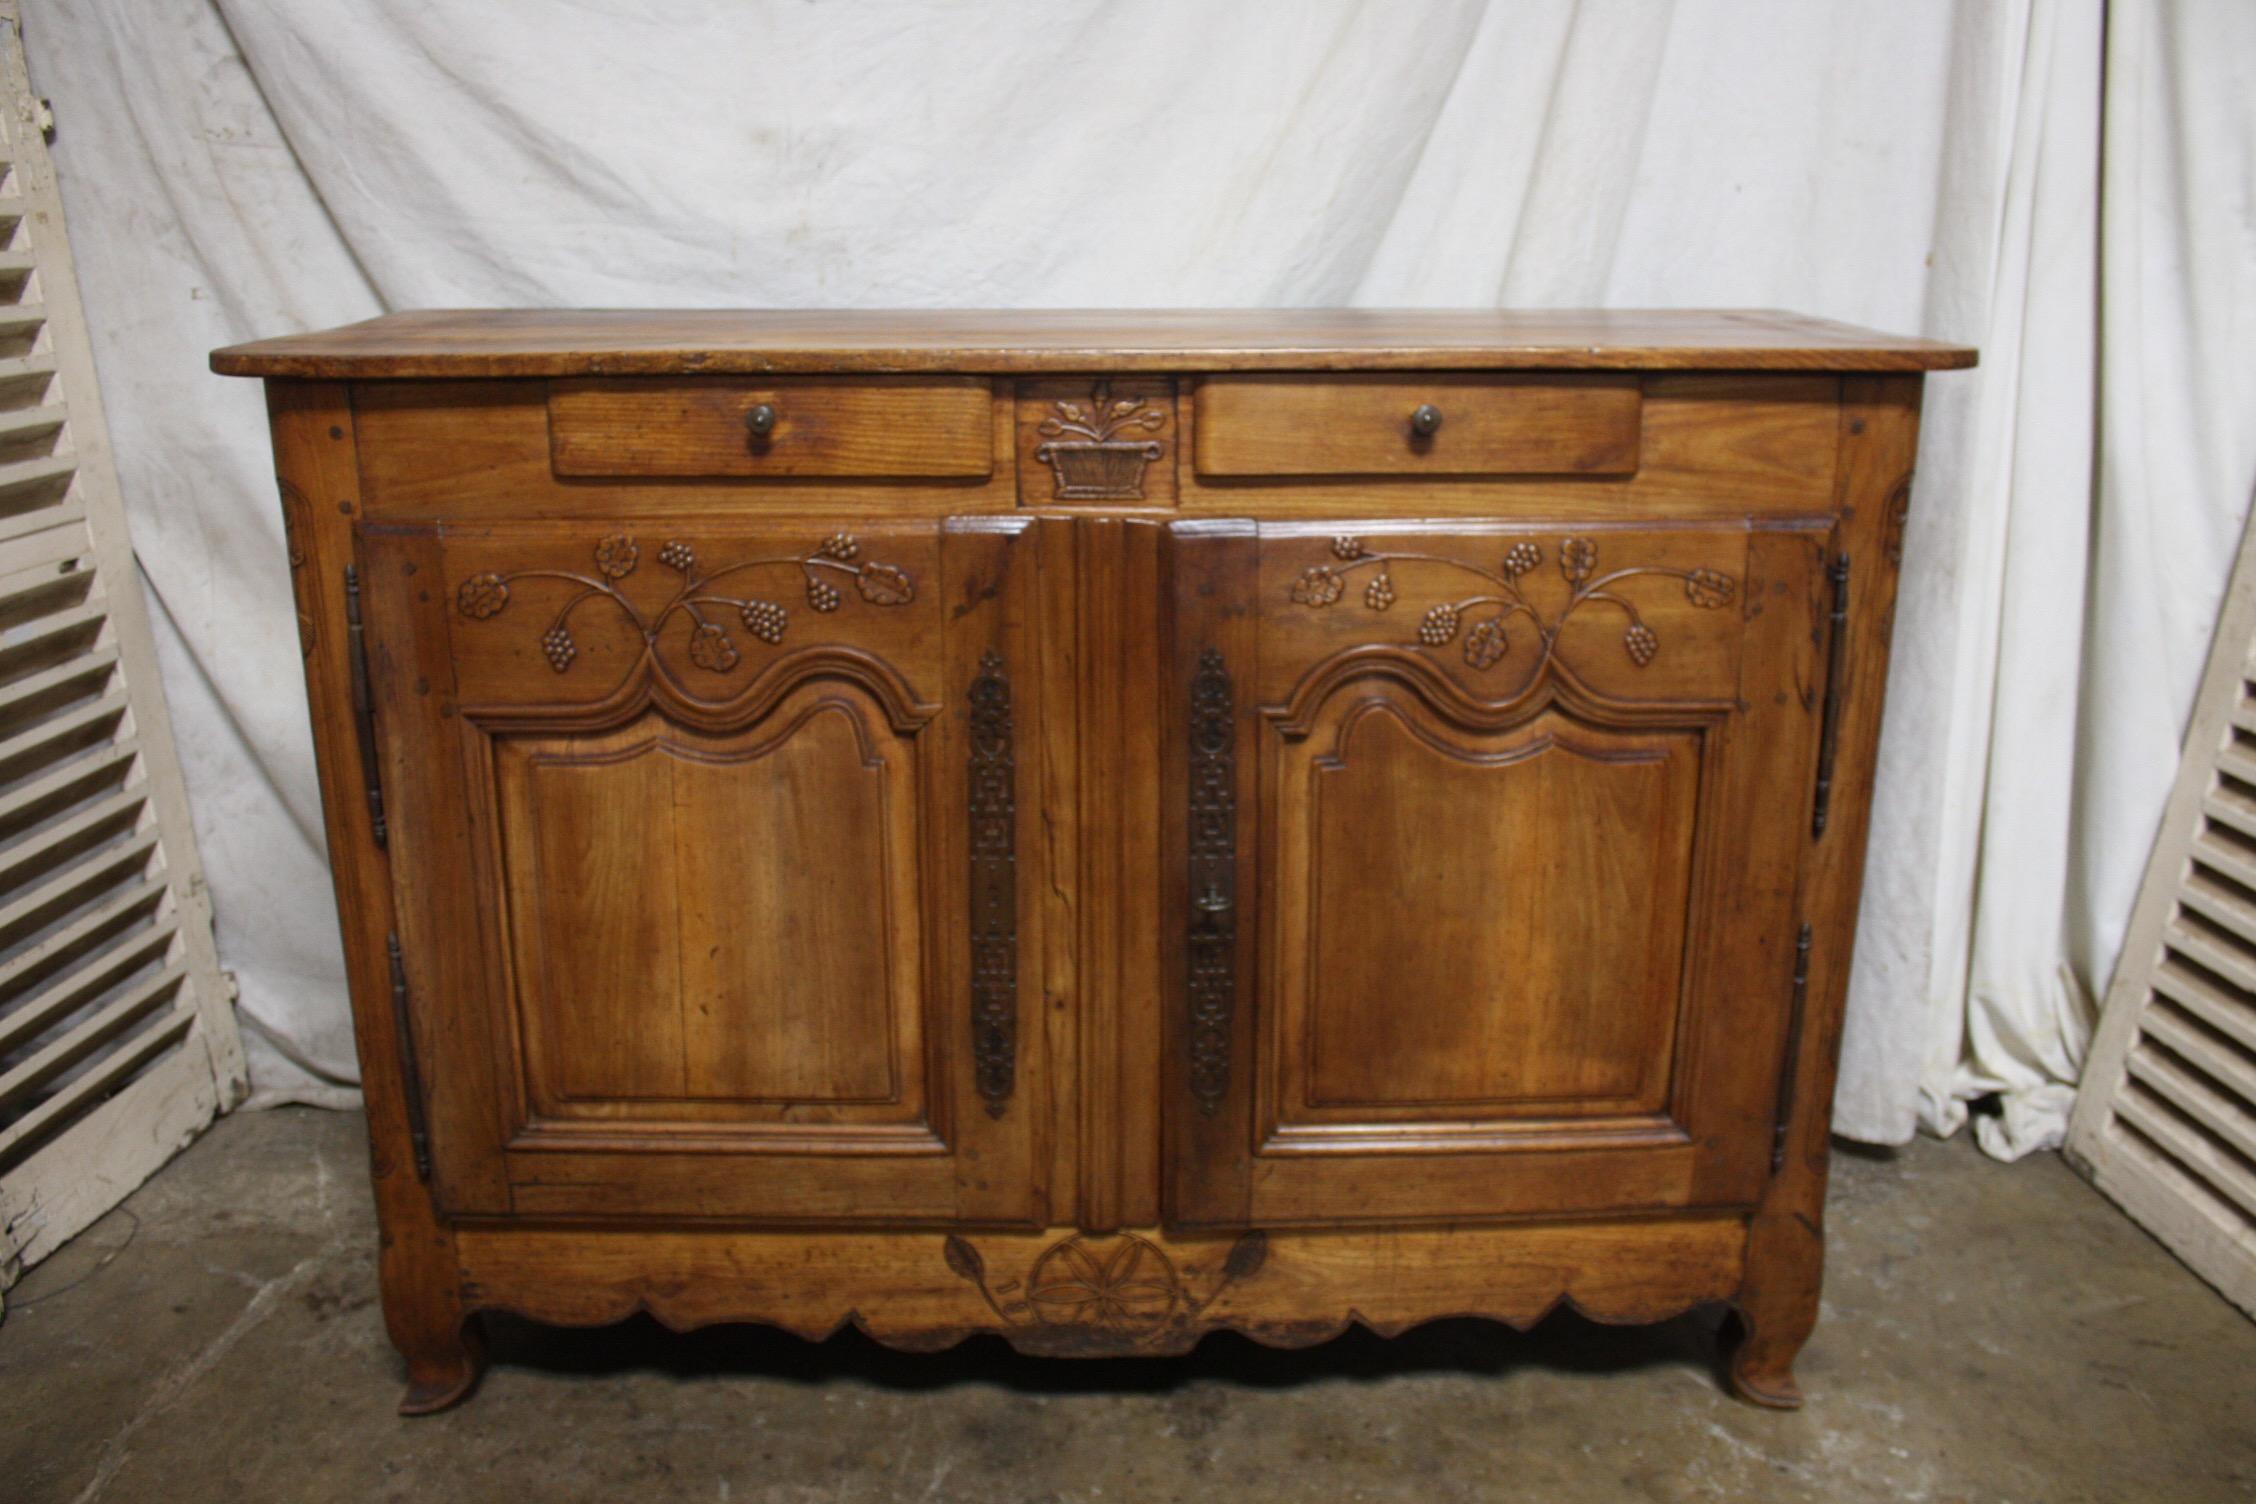 French 18th century Provencal buffet.